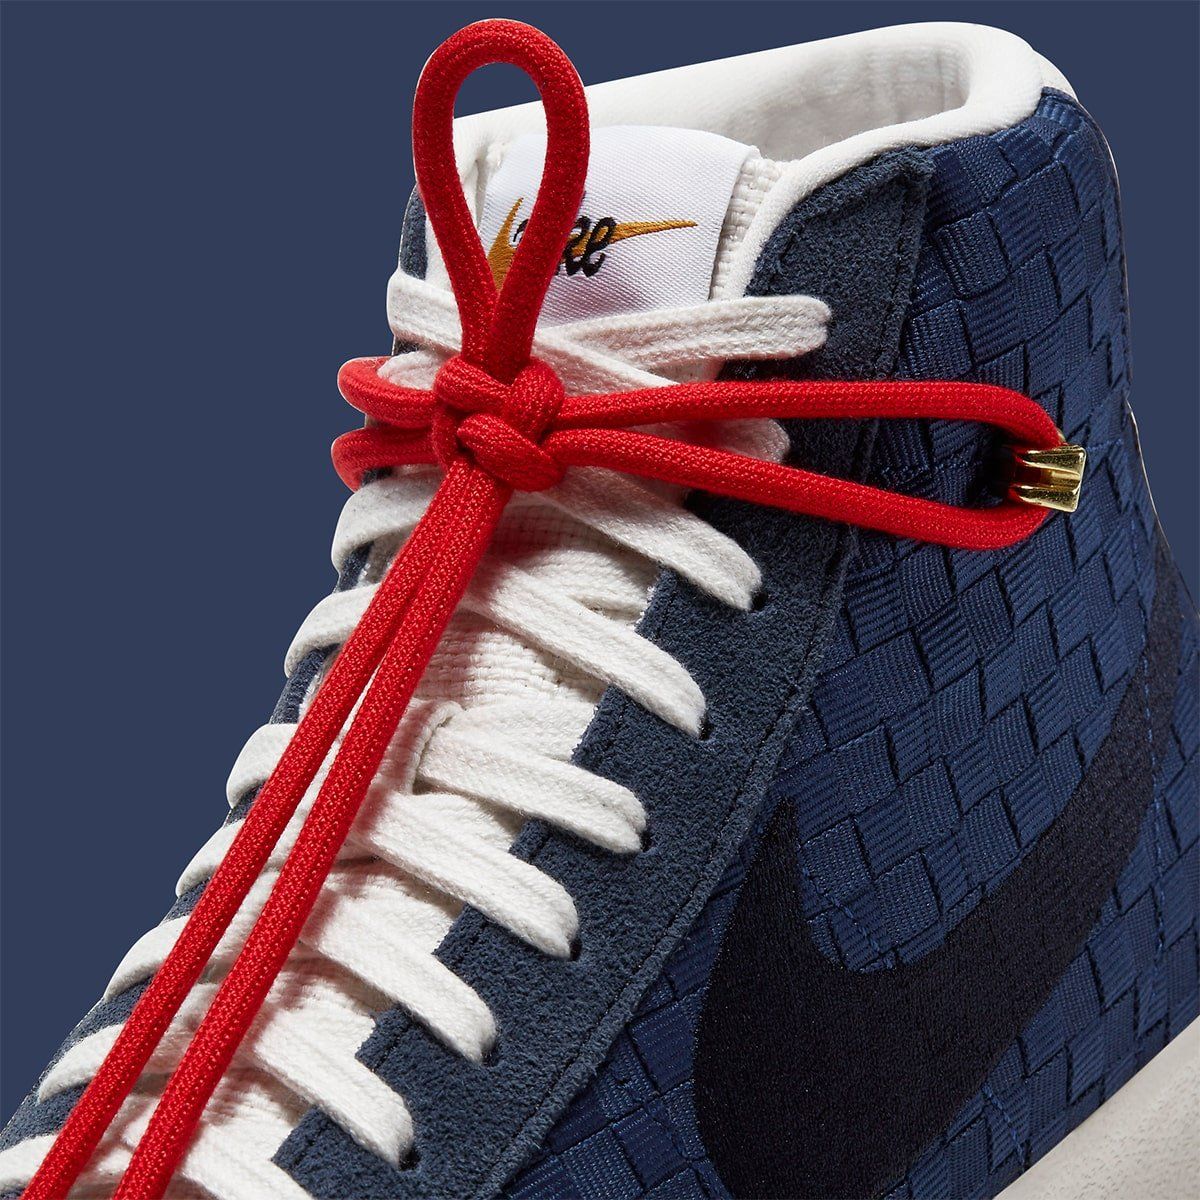 Available Now // Nike Blazer Mid 77 